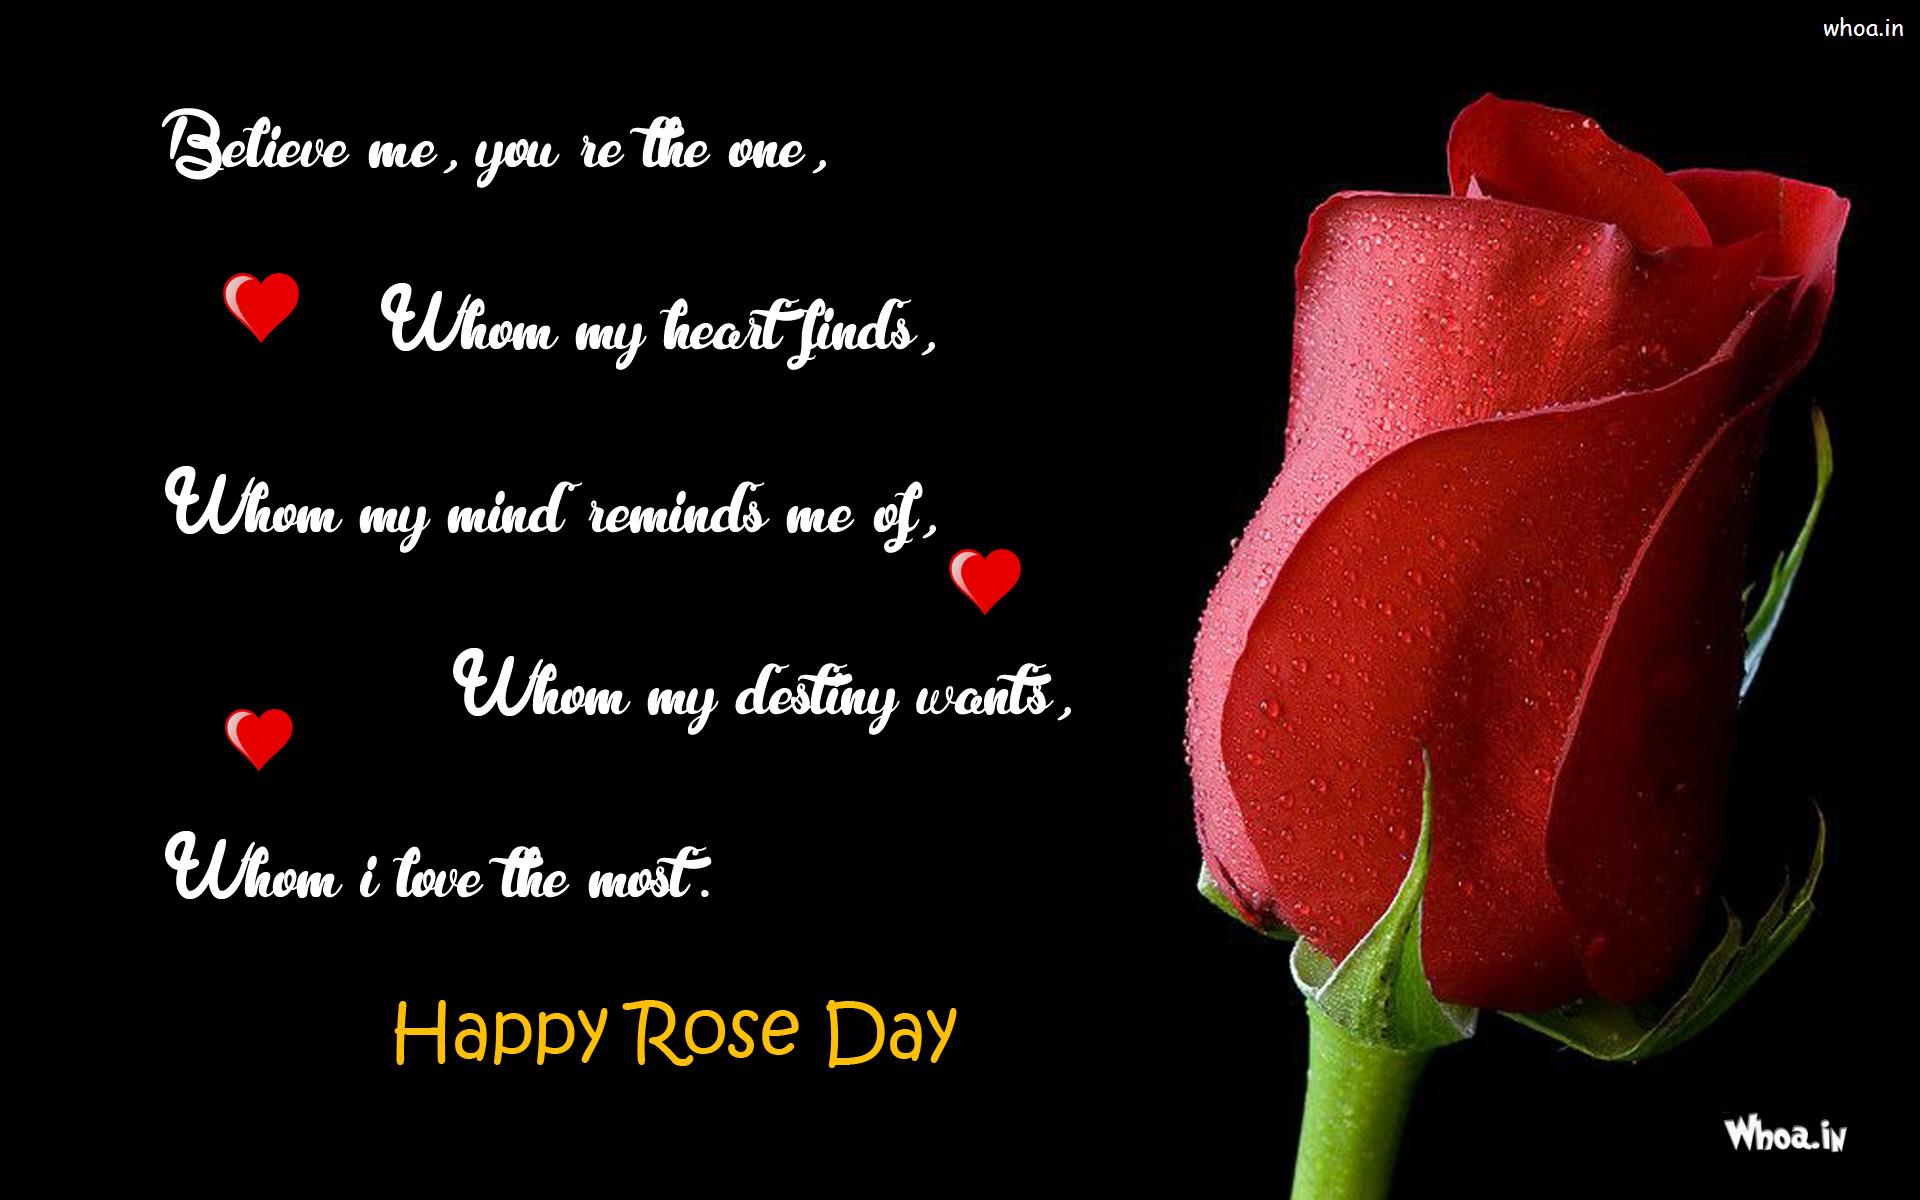 Happy Rose Day Quote Wallpaper, Black Background